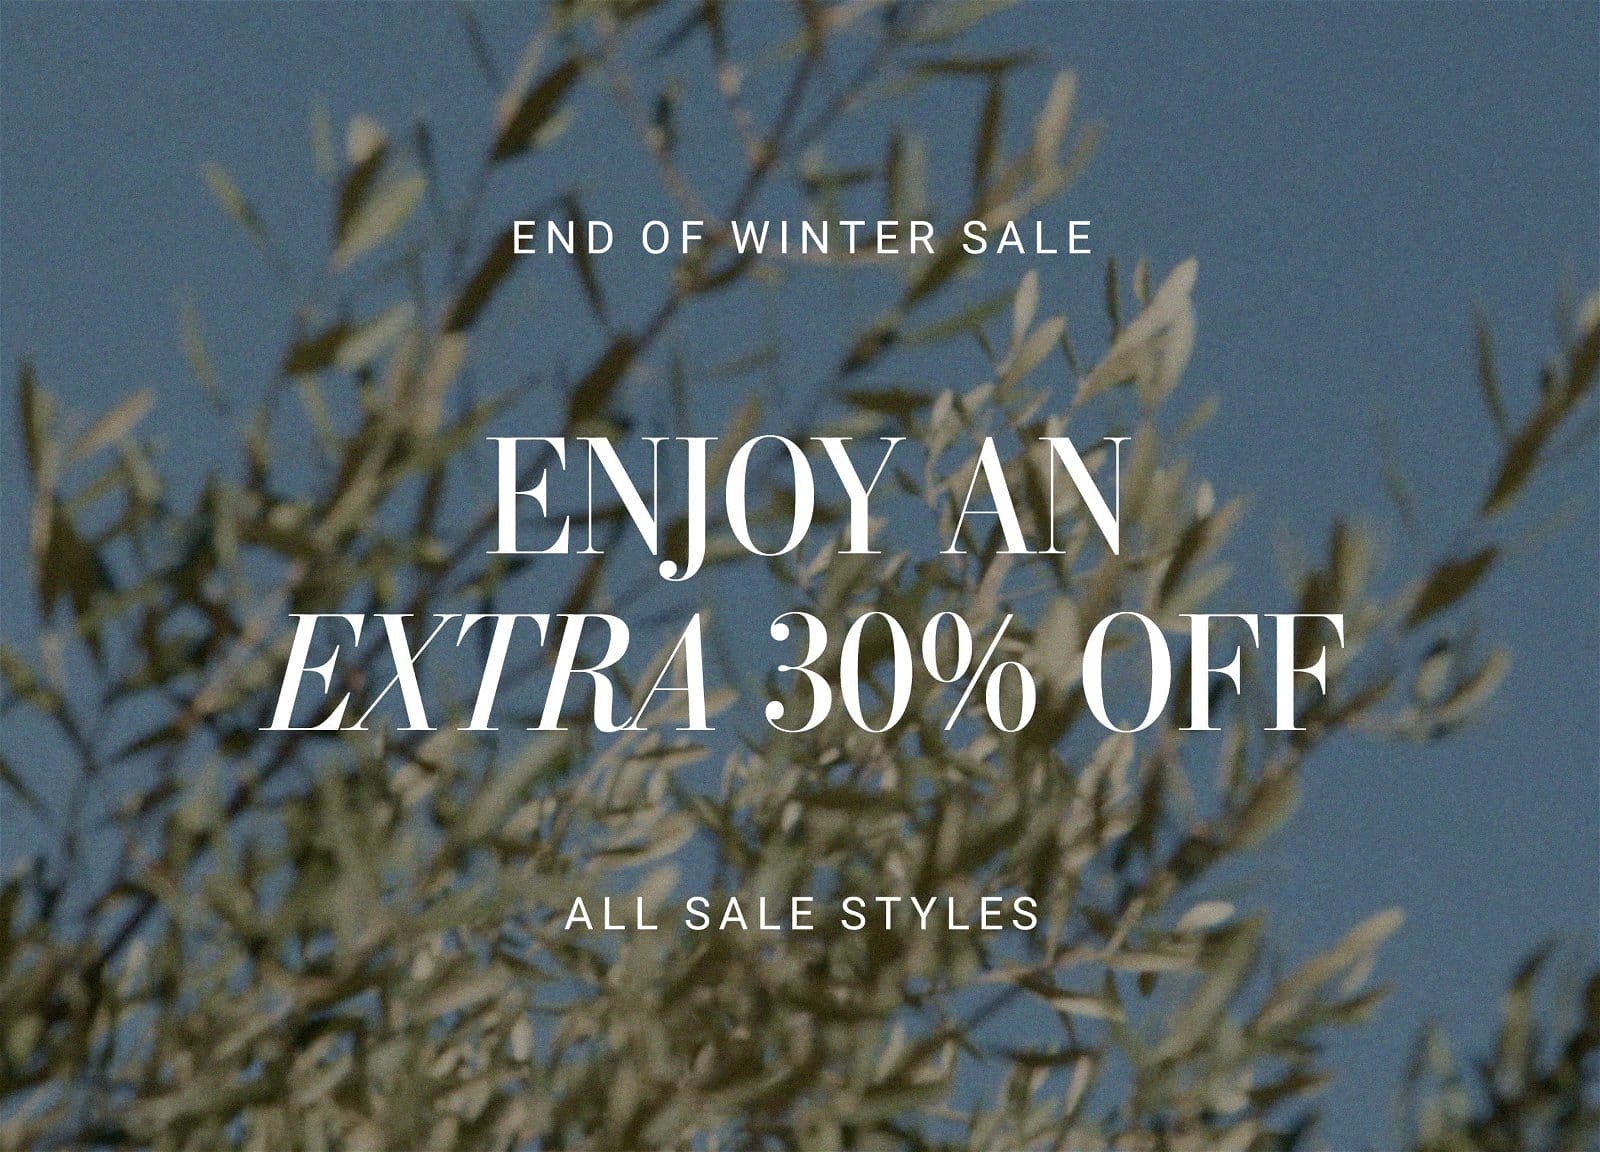 END OF WINTER SALE. ENJOY AN EXTRA 30% OFF ALL SALE STYLES